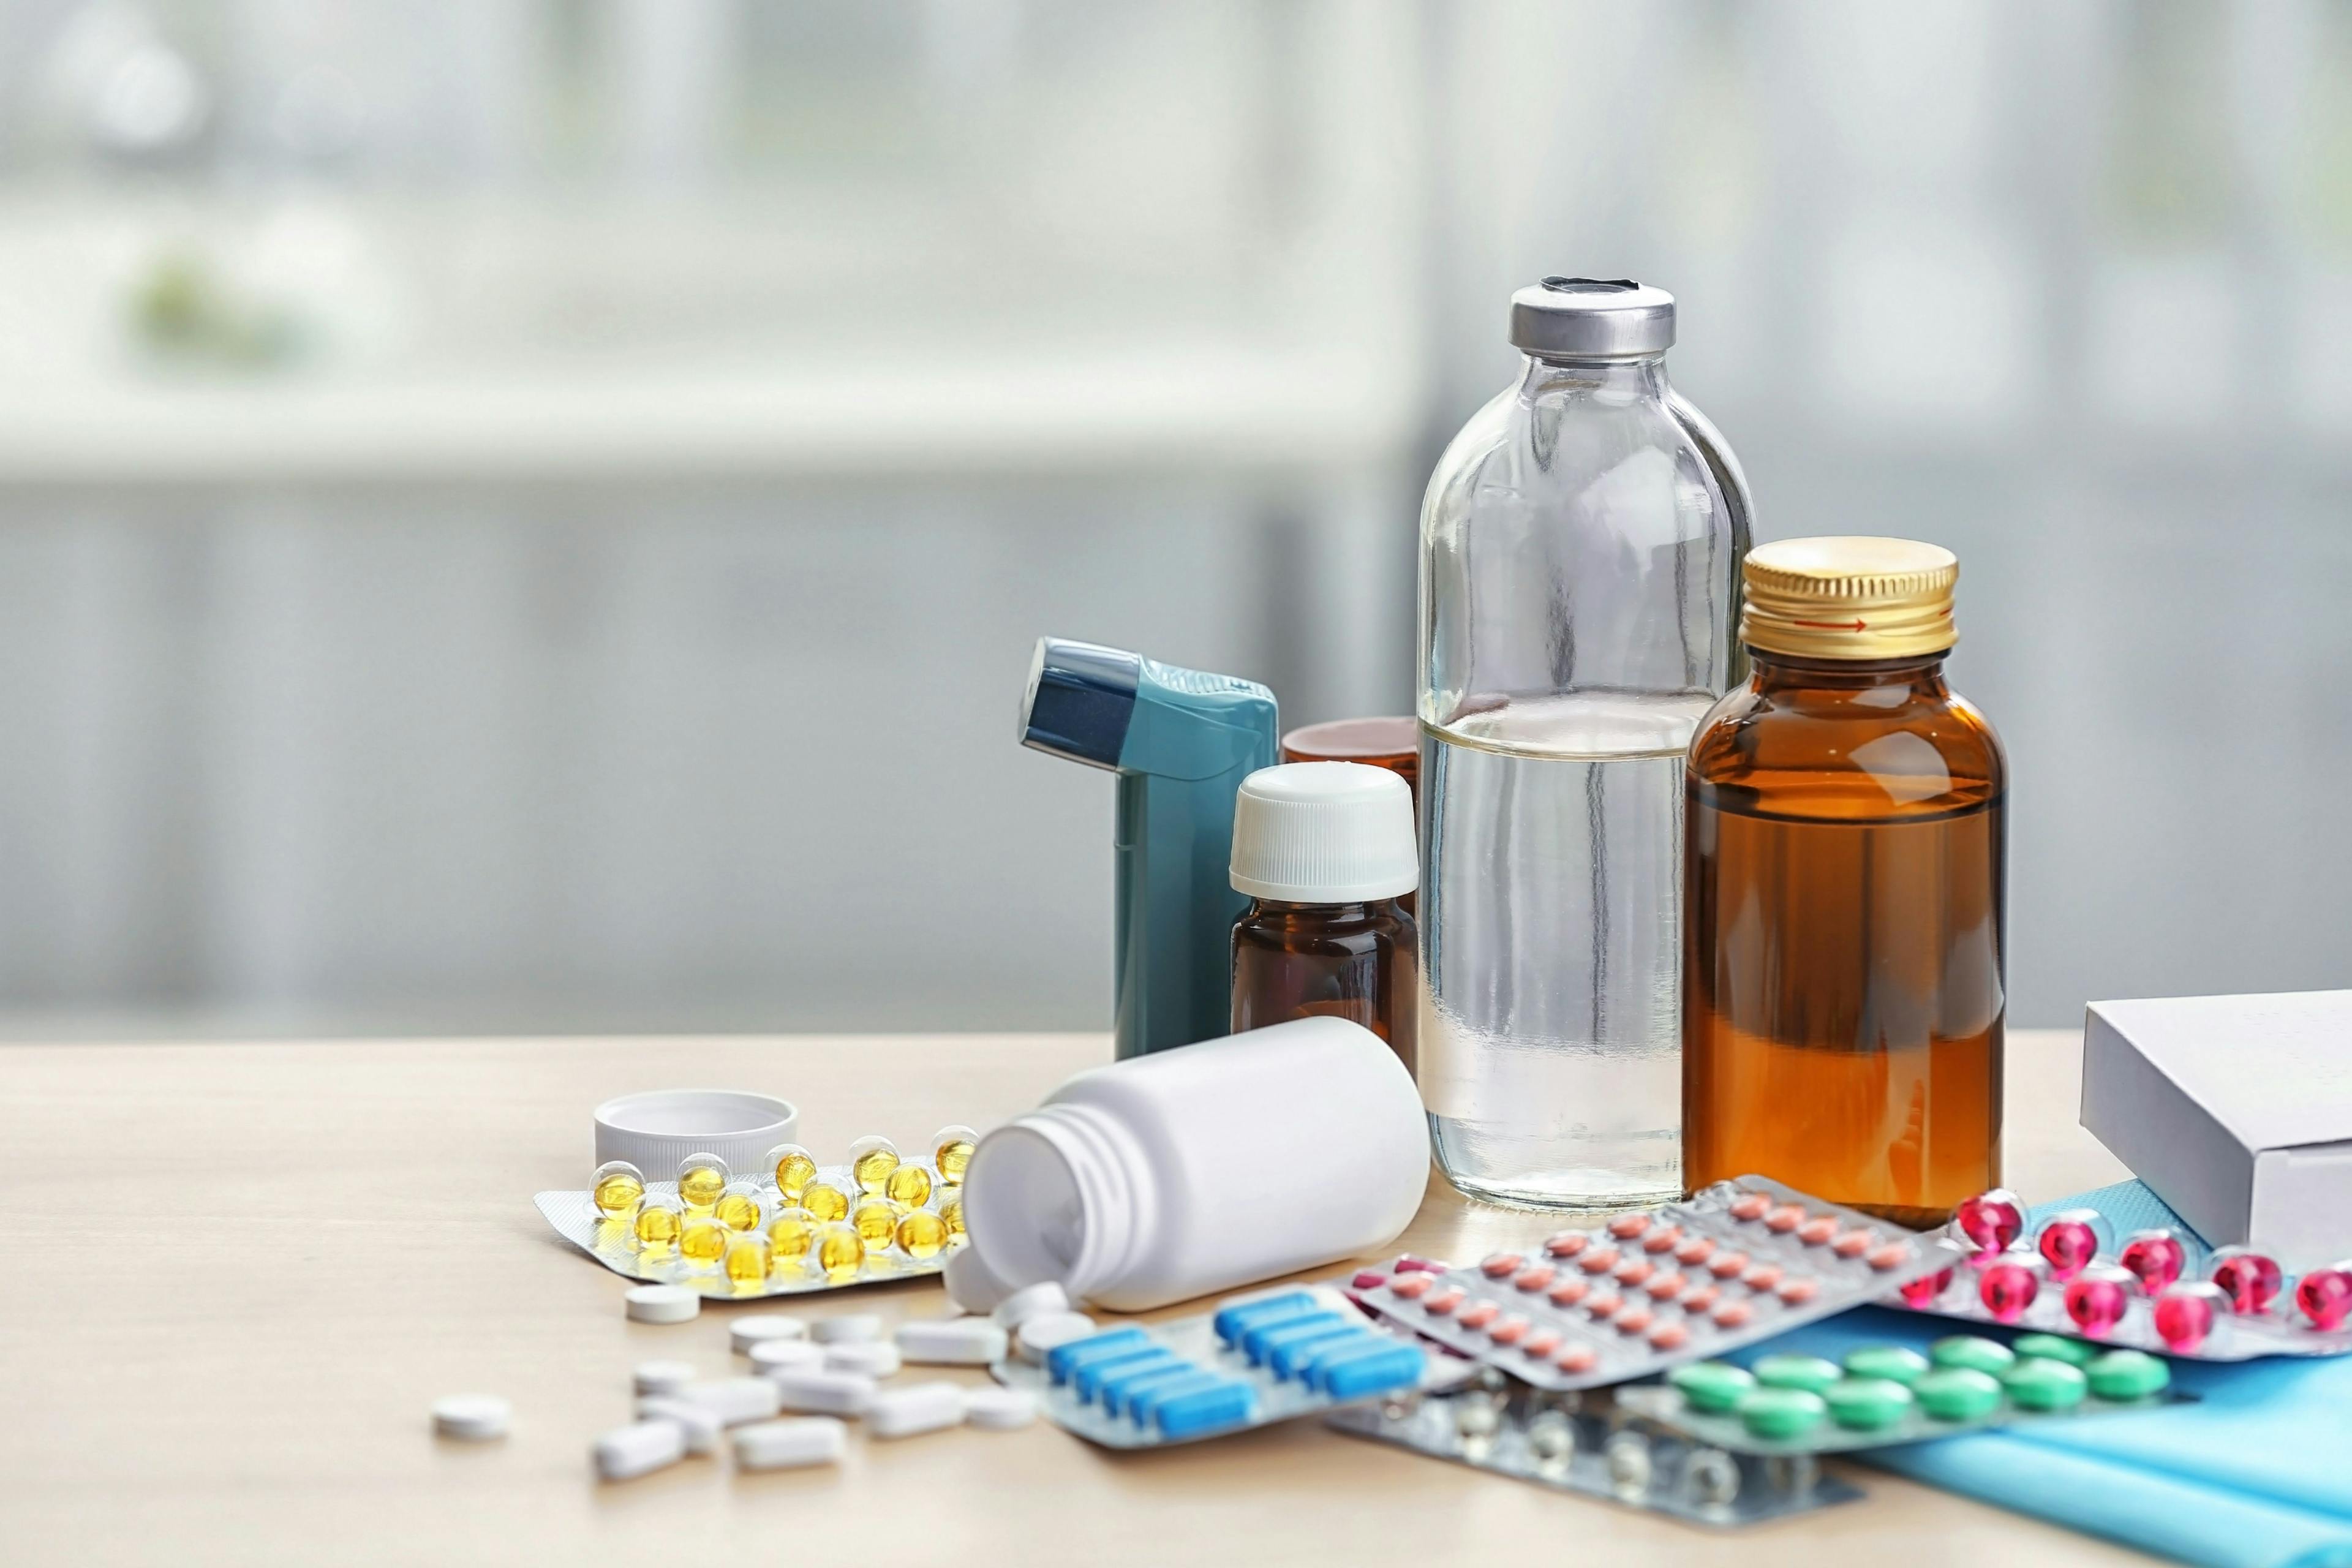 Different medicines and pills on wooden table | Image Credit: © Africa Studio - stock.adobe.com